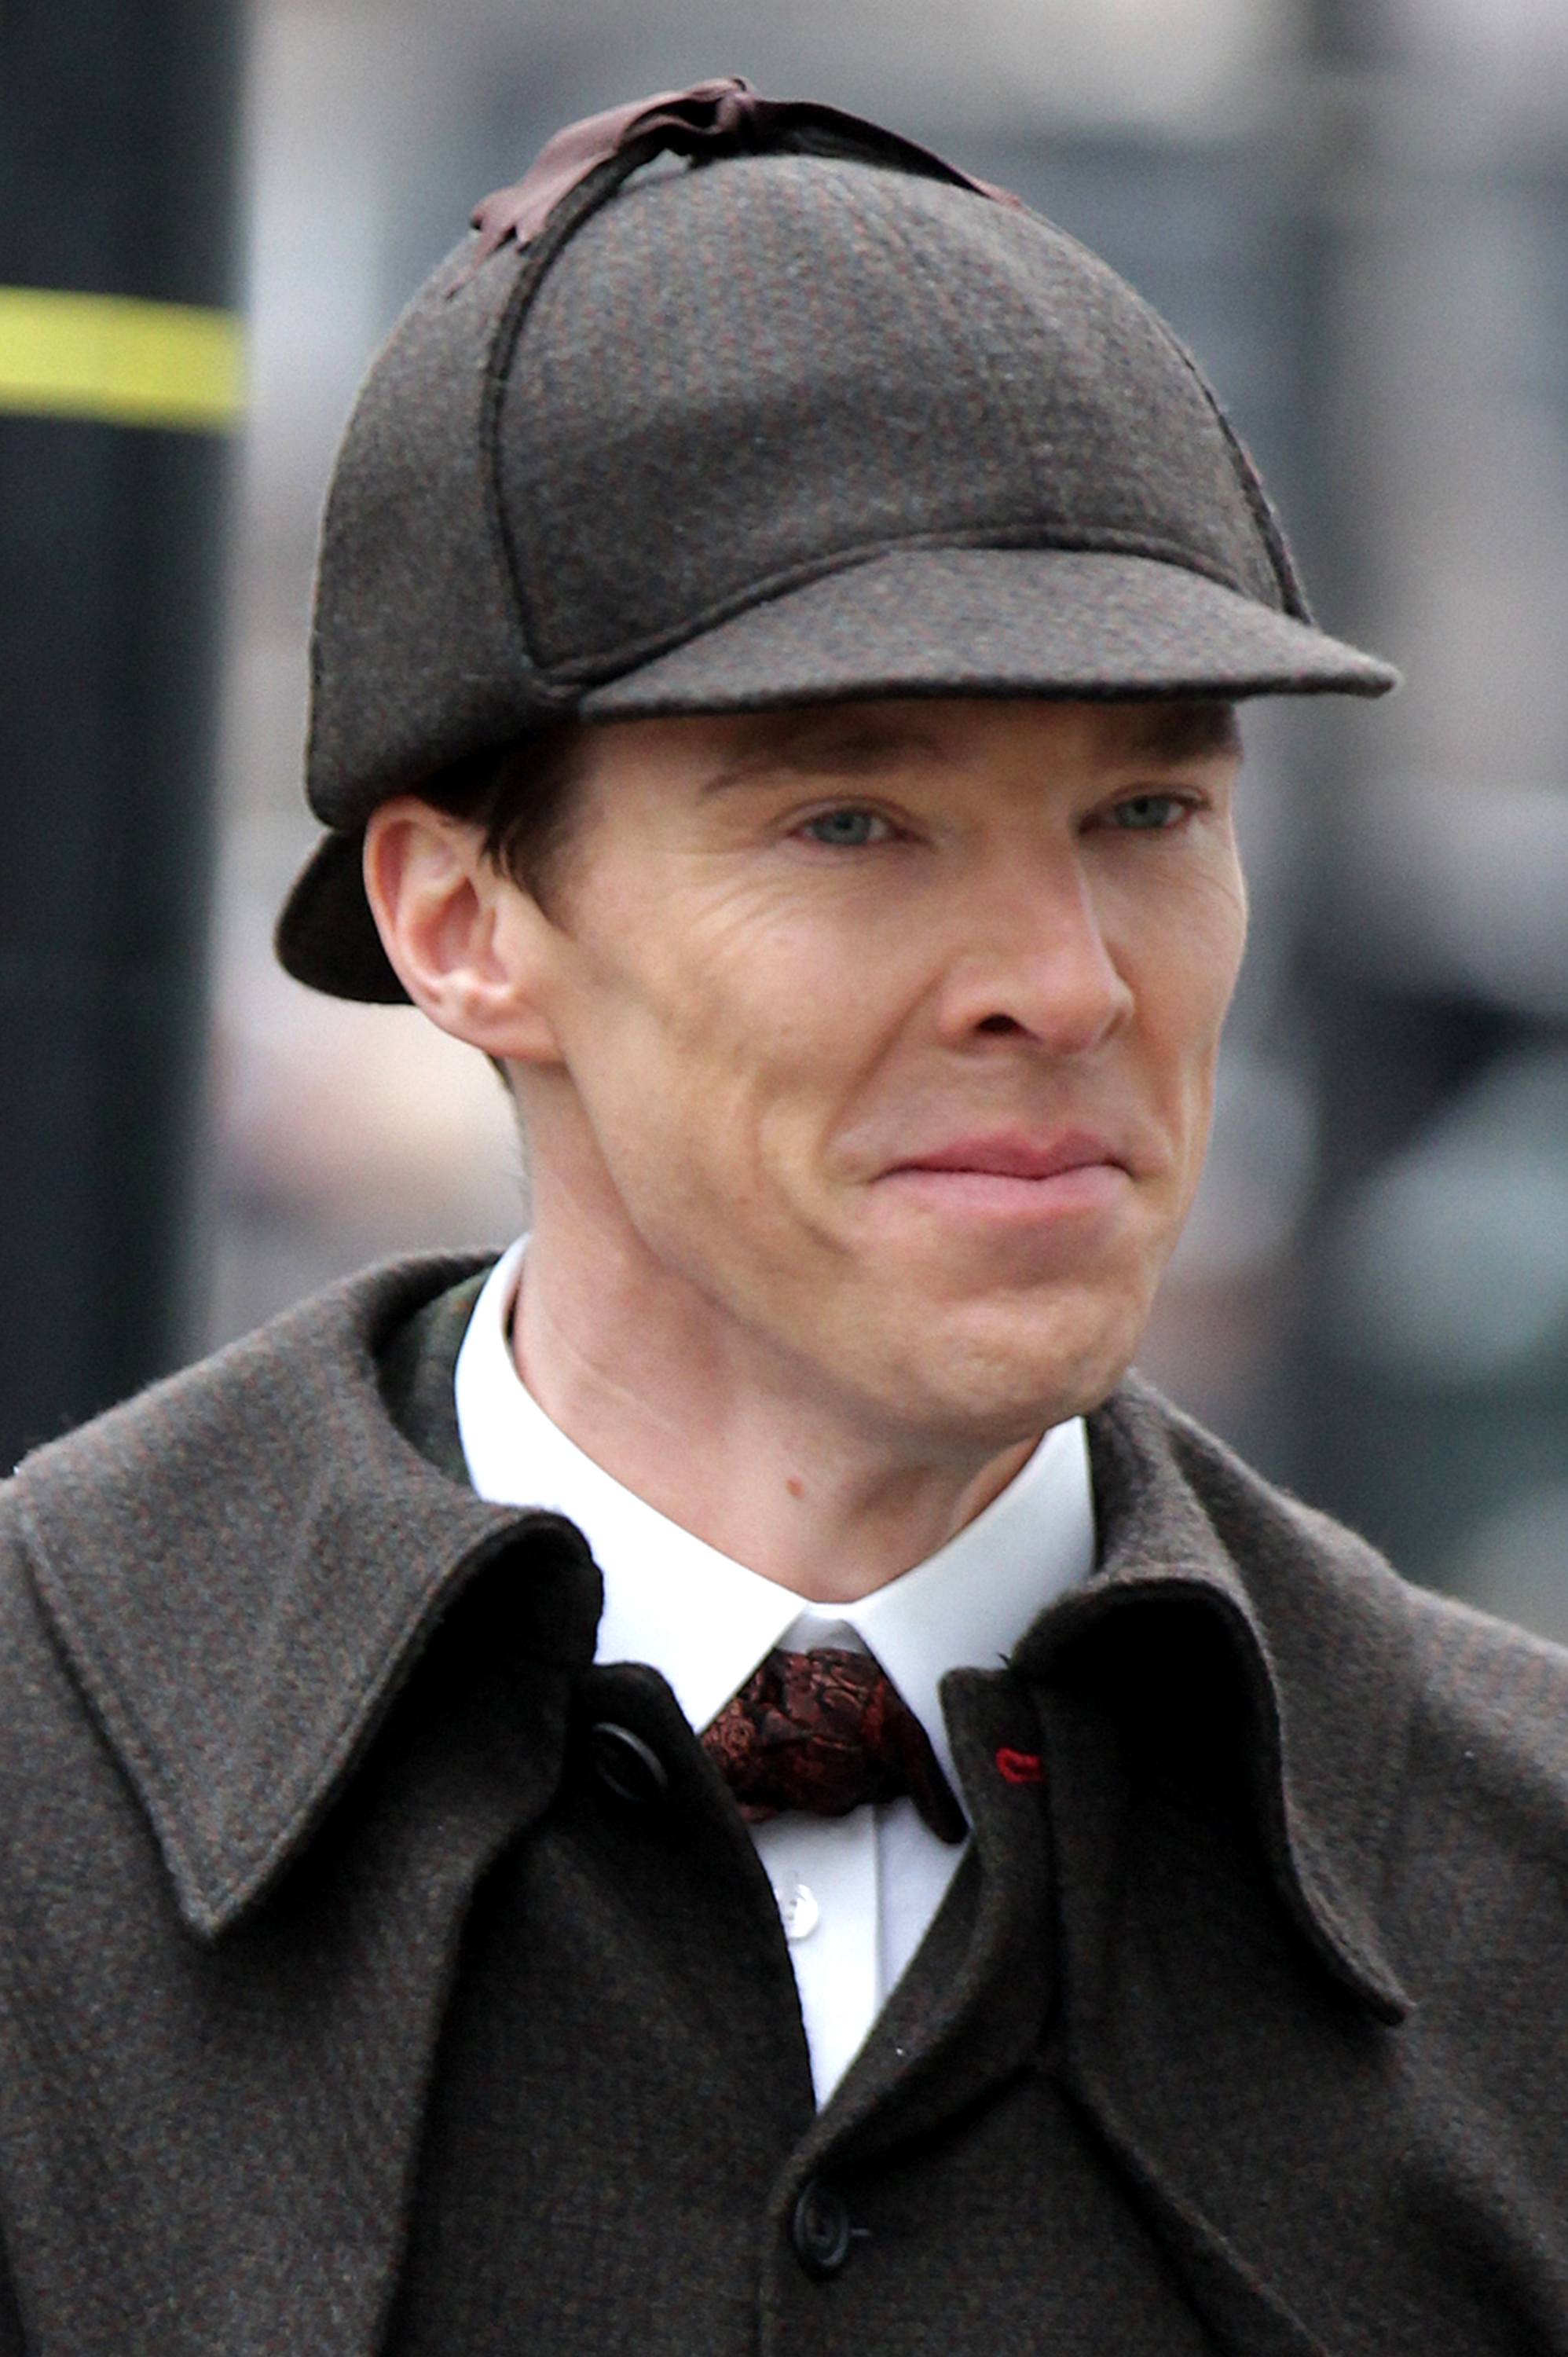 Benedict Cumberbatch sighted filming Sherlock in London on February 7, 2015 in London, England